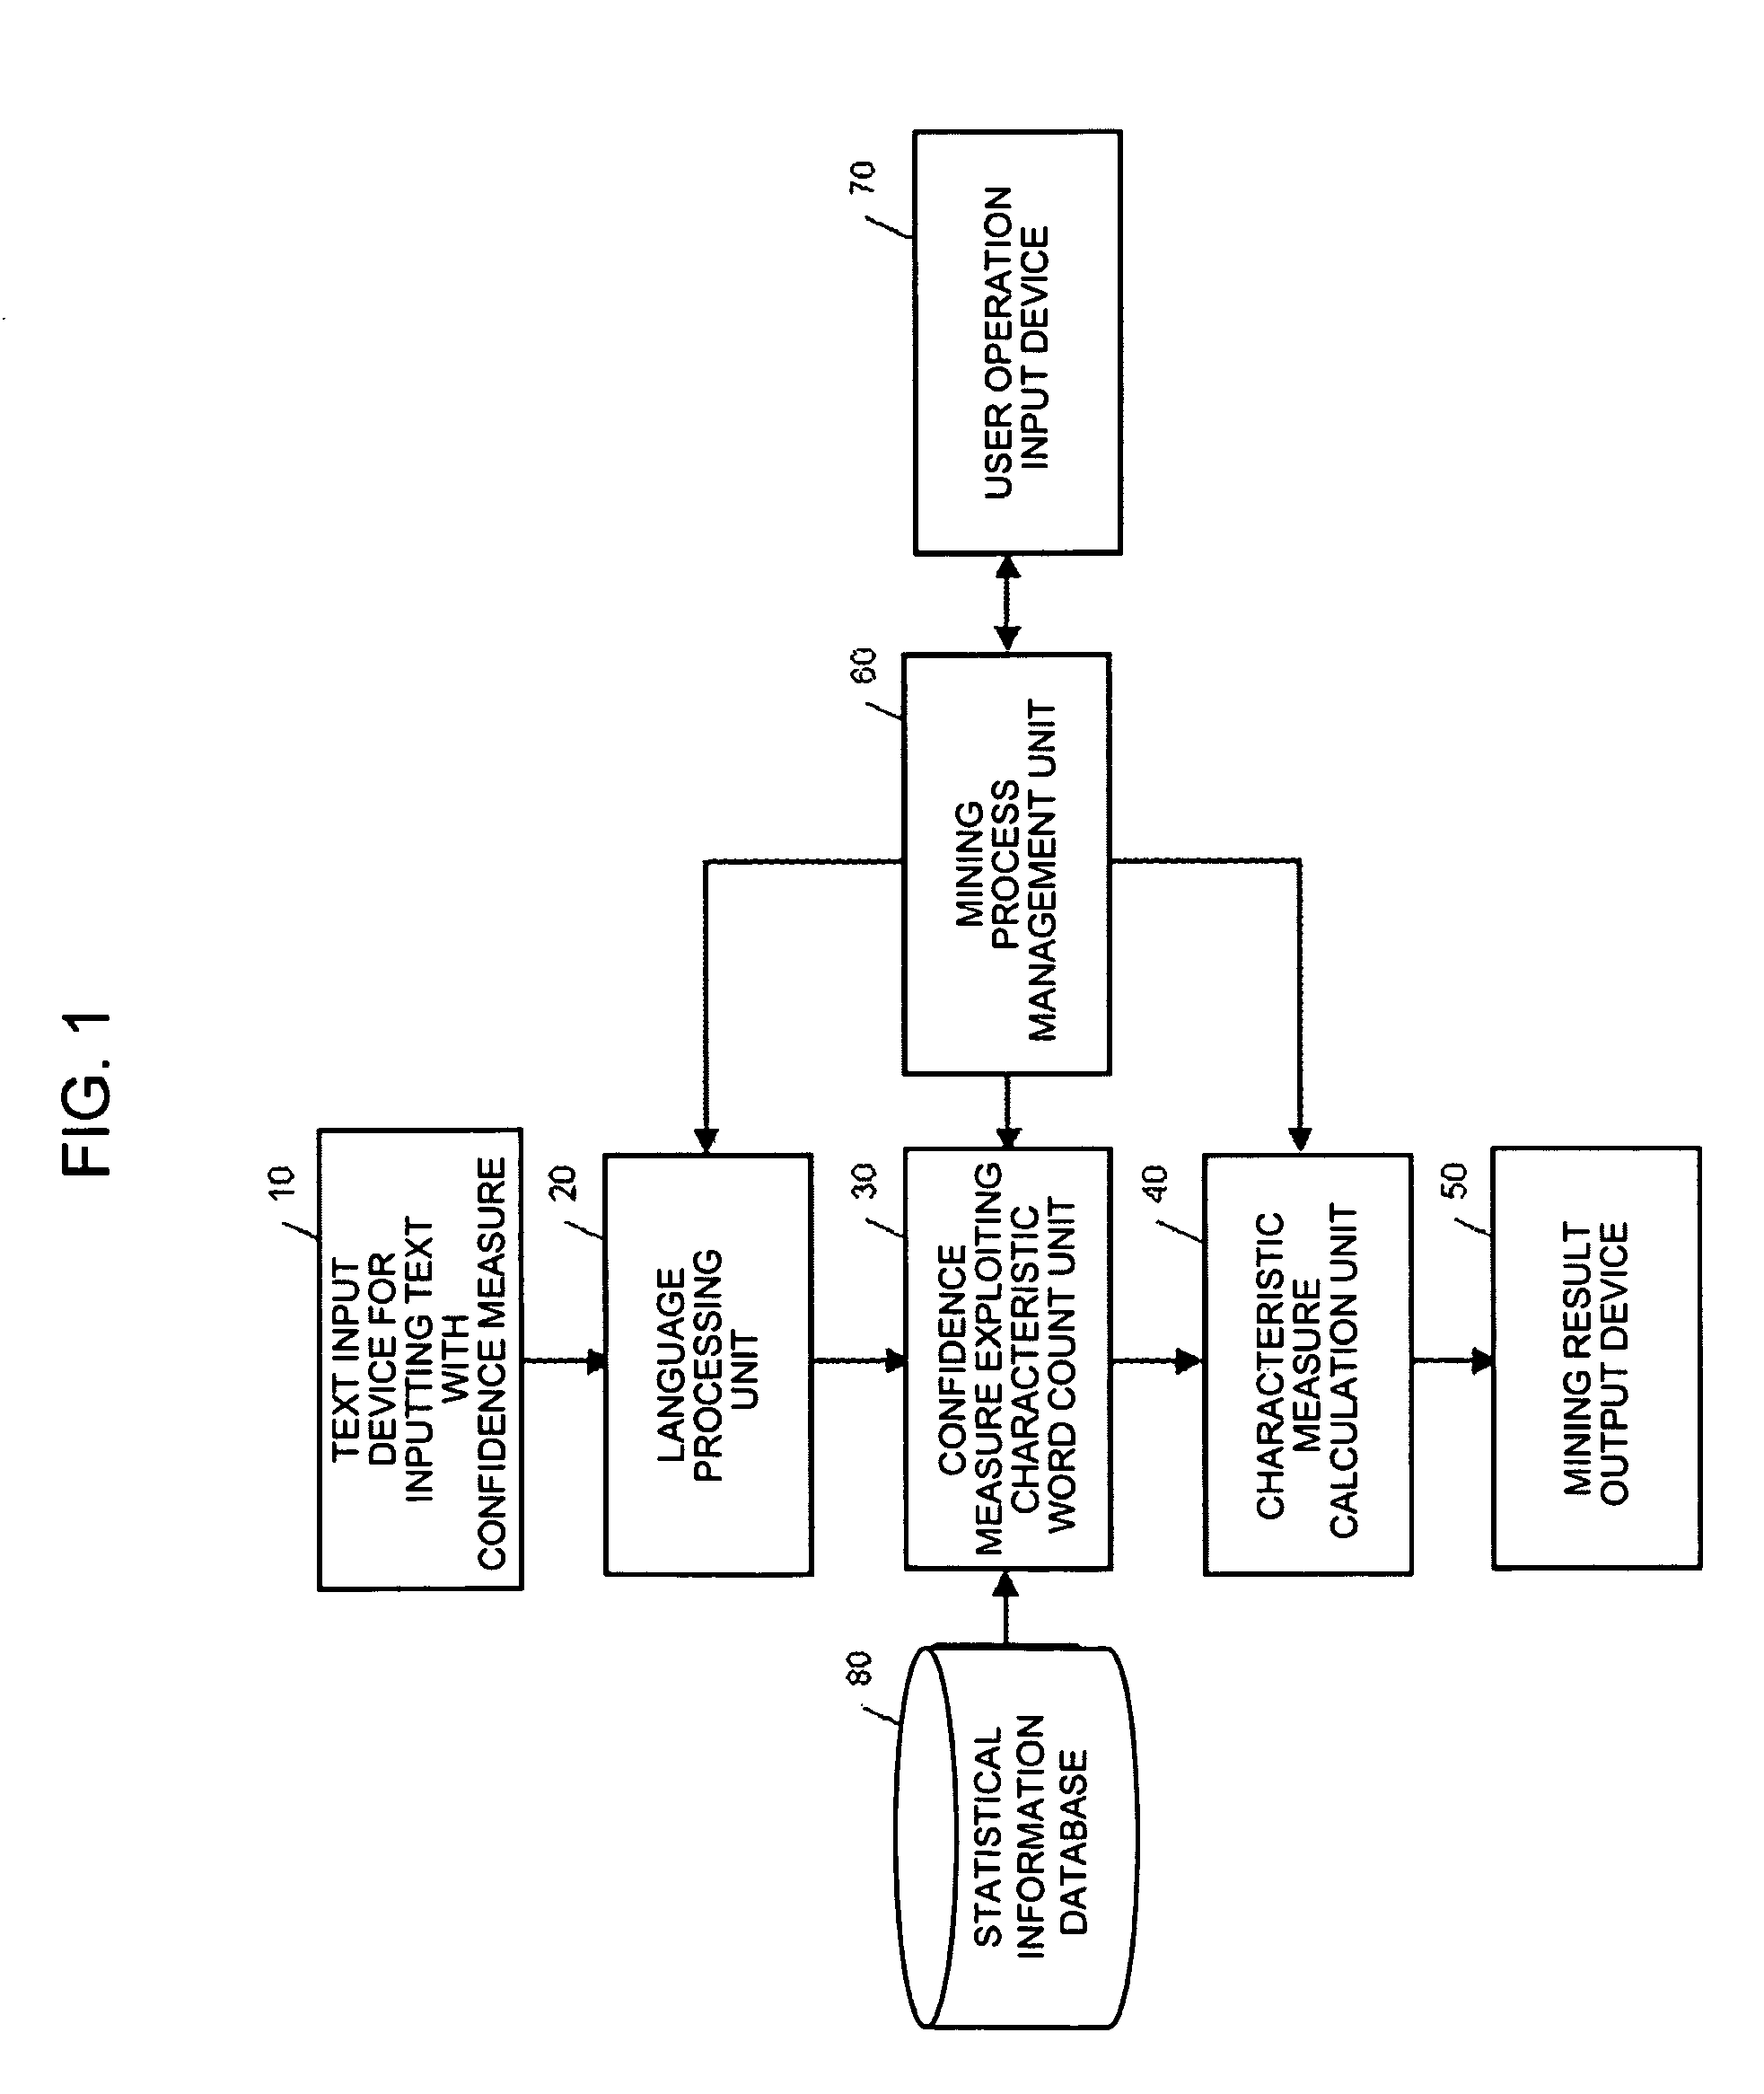 Apparatus, method and program for text mining